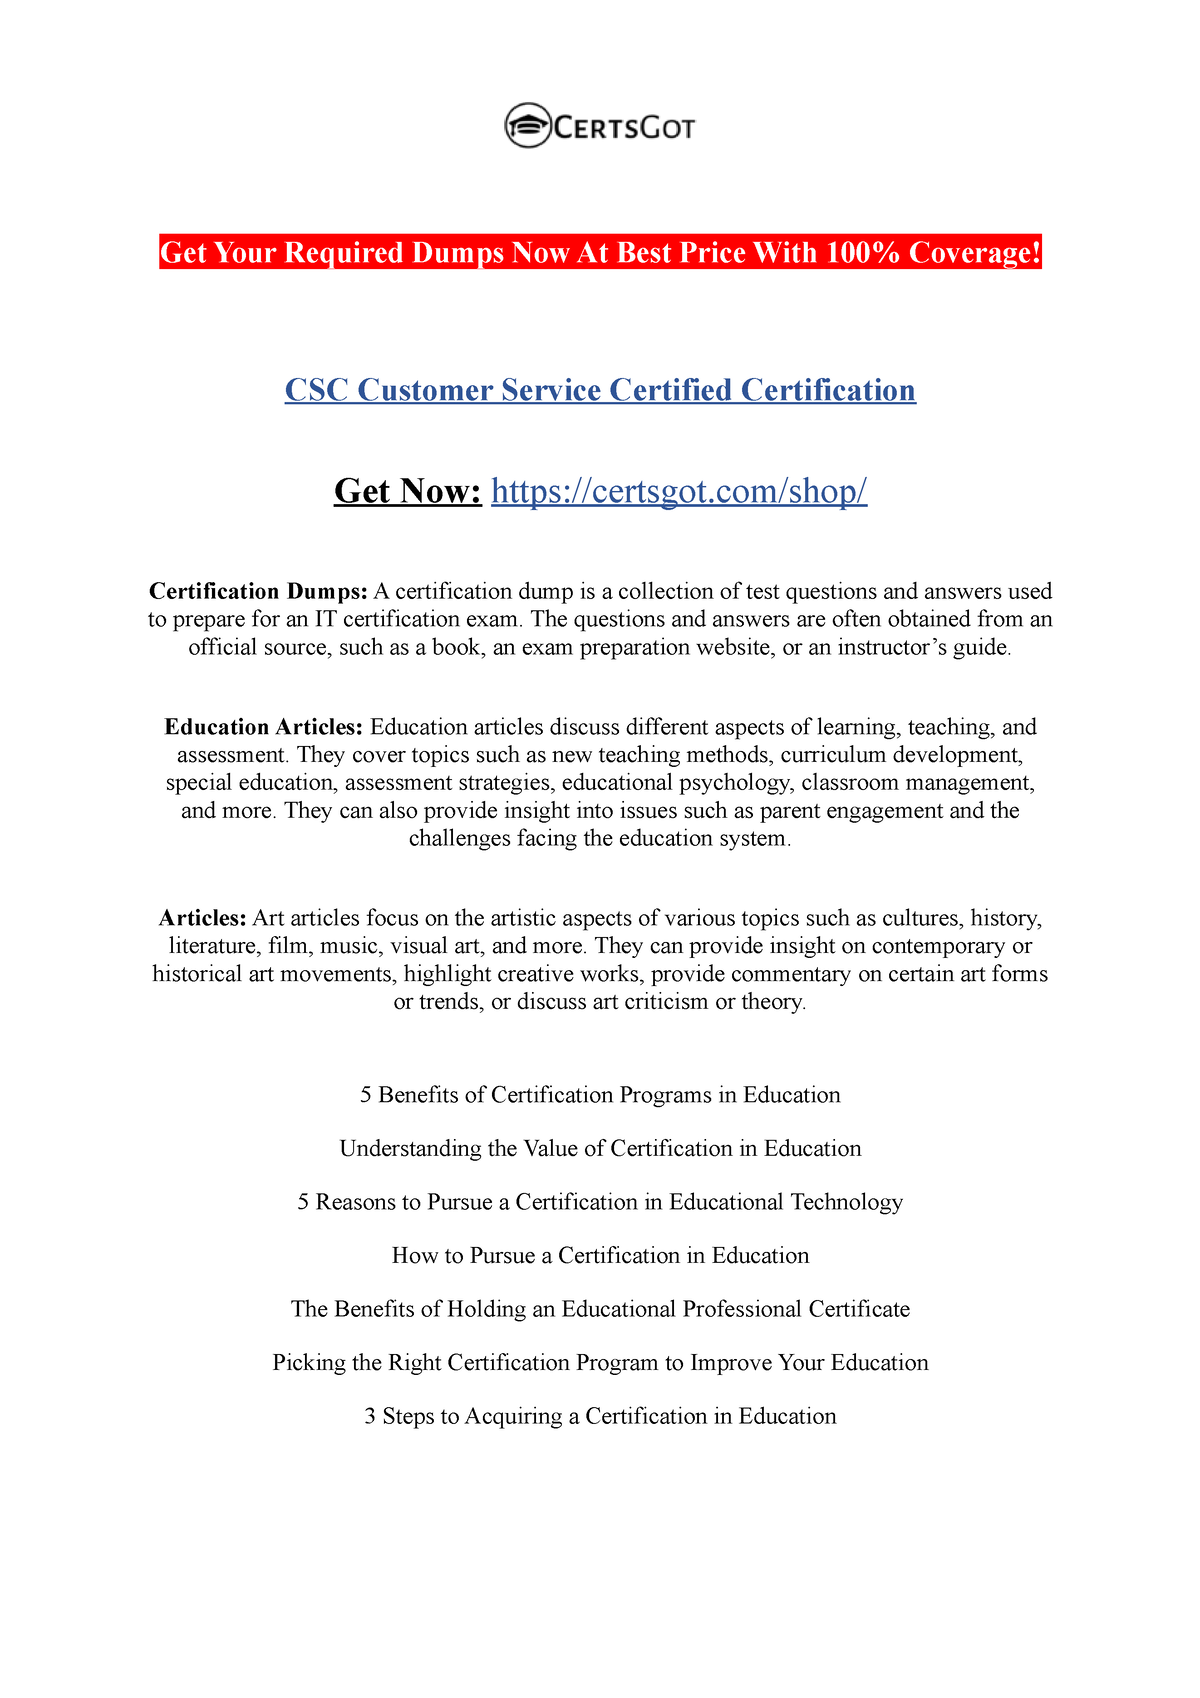 CSC Customer Service Certified Certification Get Your Required Dumps